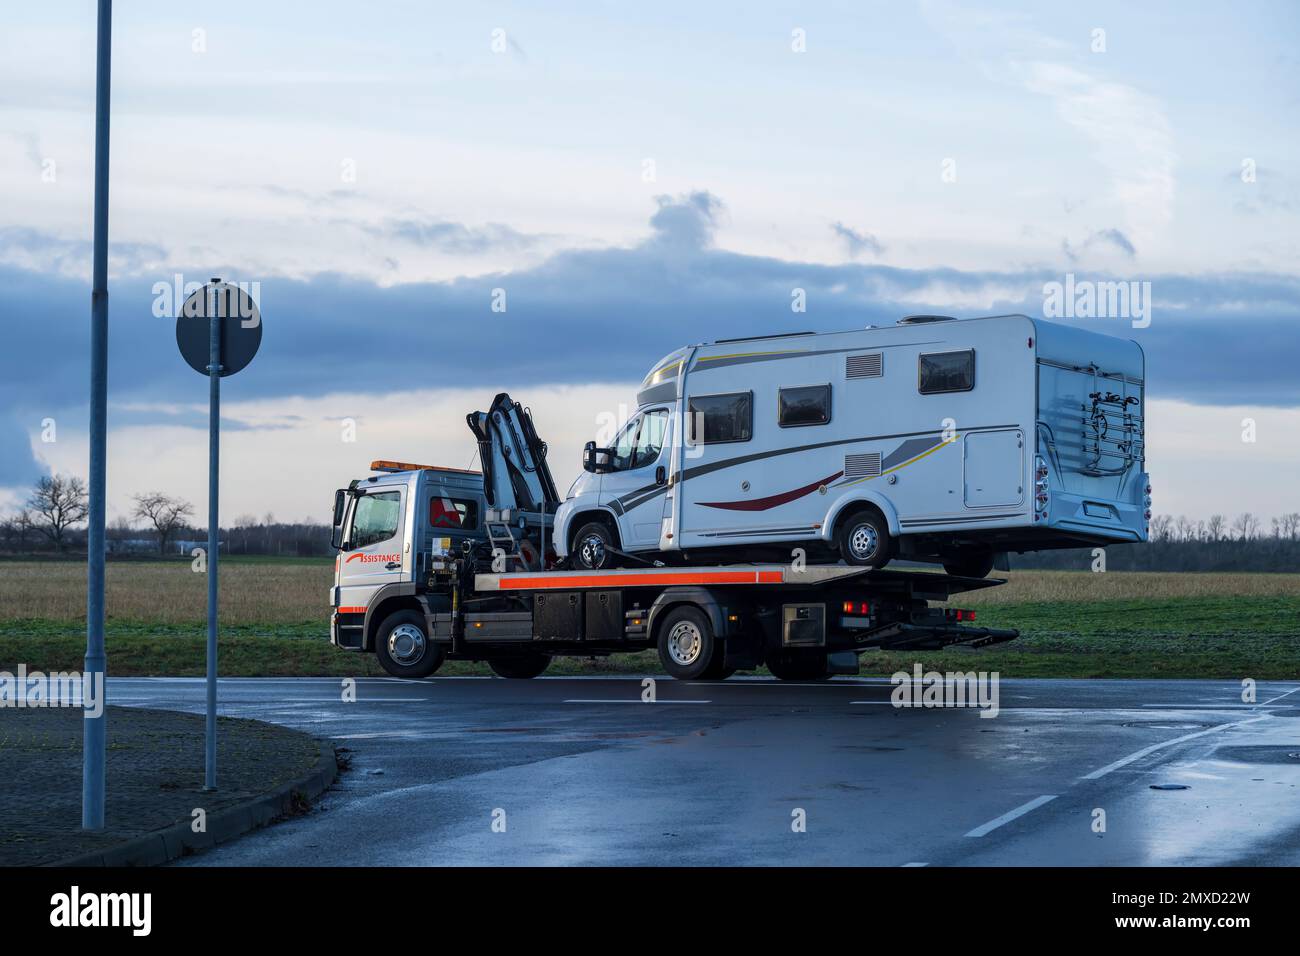 A motorhome on a tow truck Stock Photo